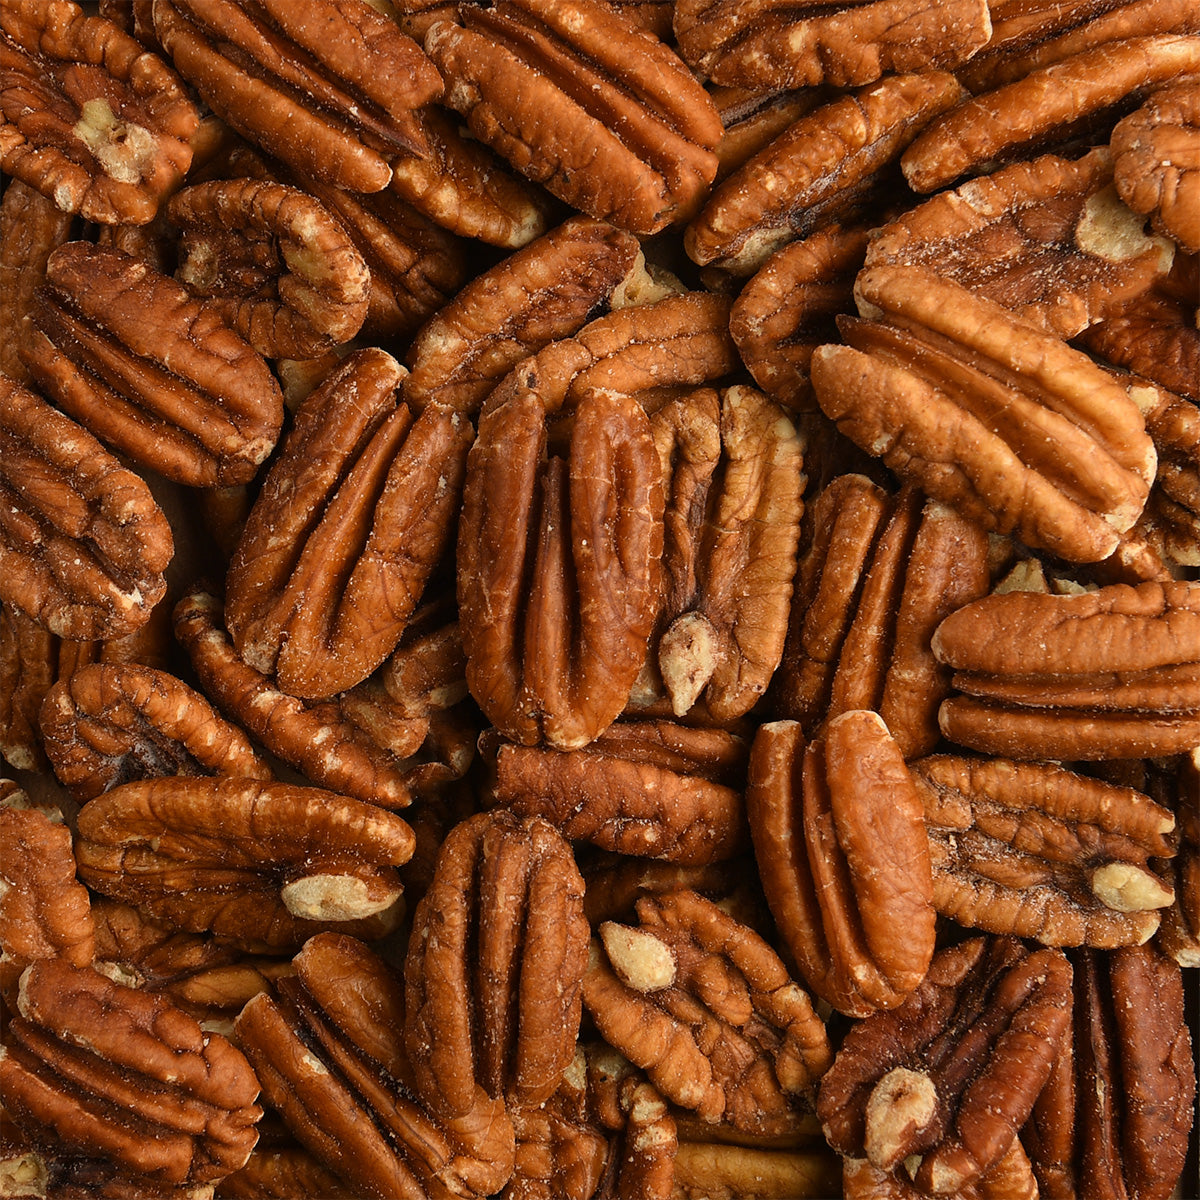 Roasted and Salted Georgia Pecans